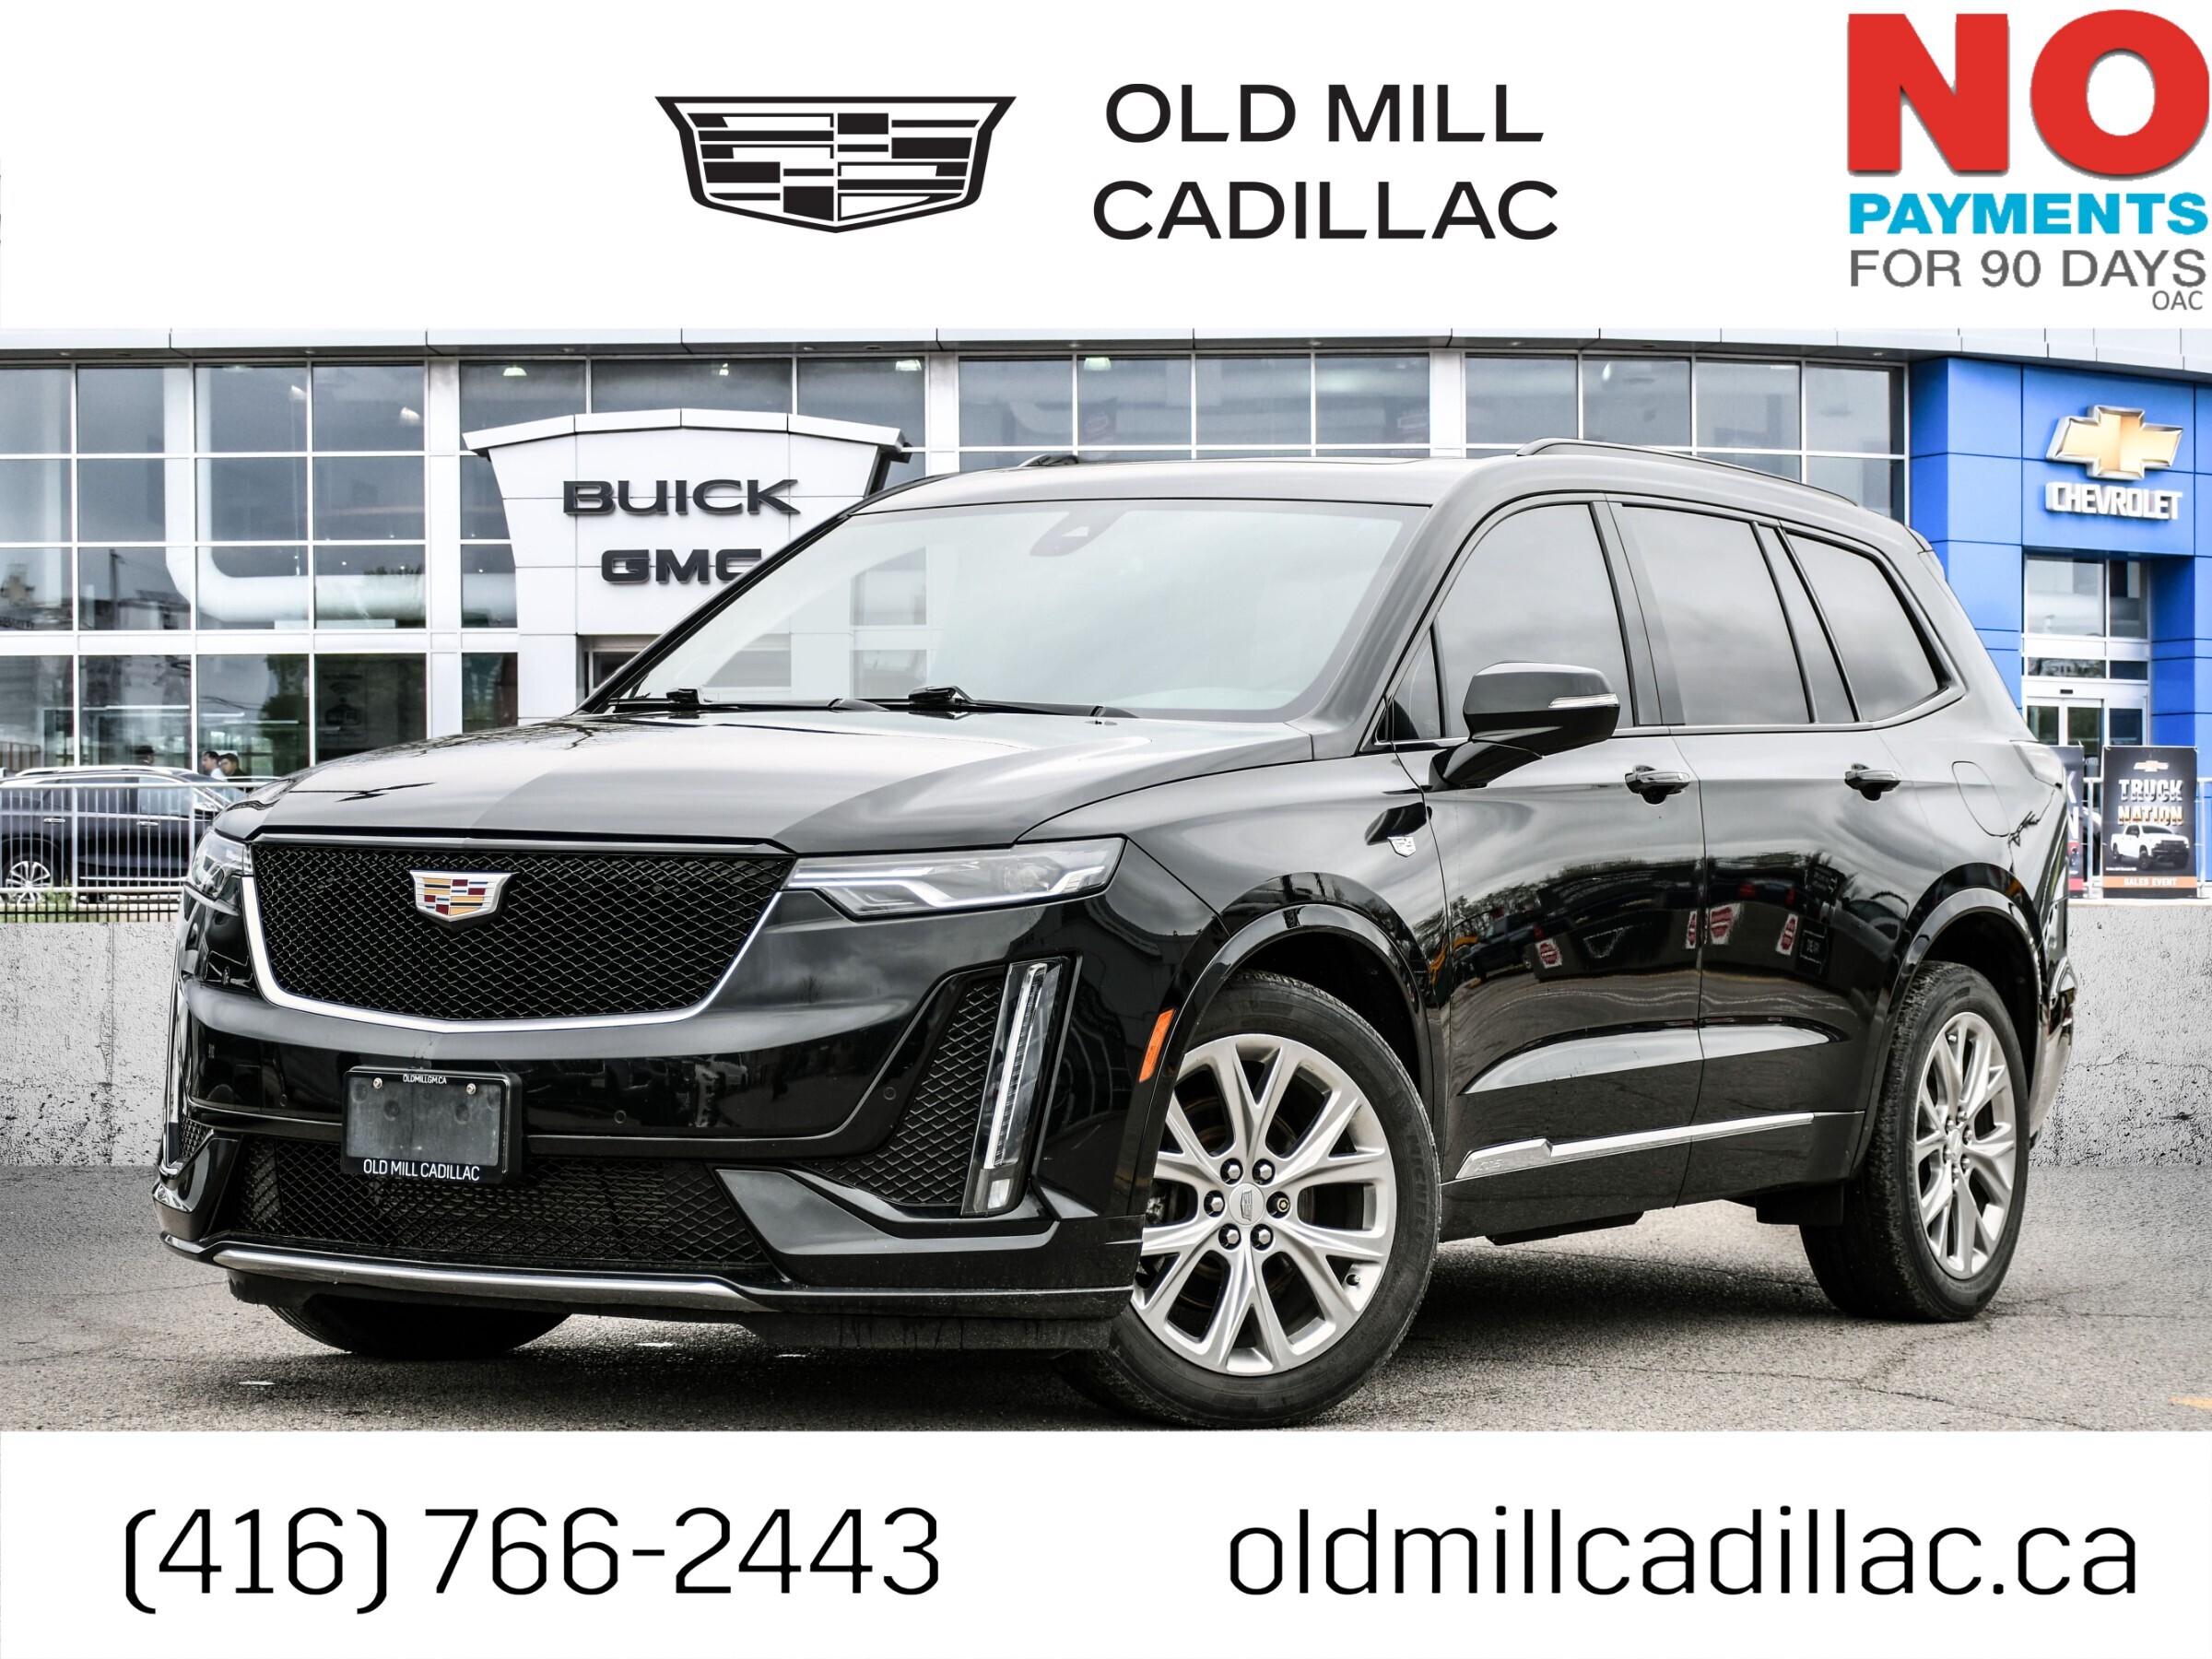 2020 Cadillac XT6 CLEAN CARFAX | PANO ROOF | 7 PASS | POWER TRUNK | 